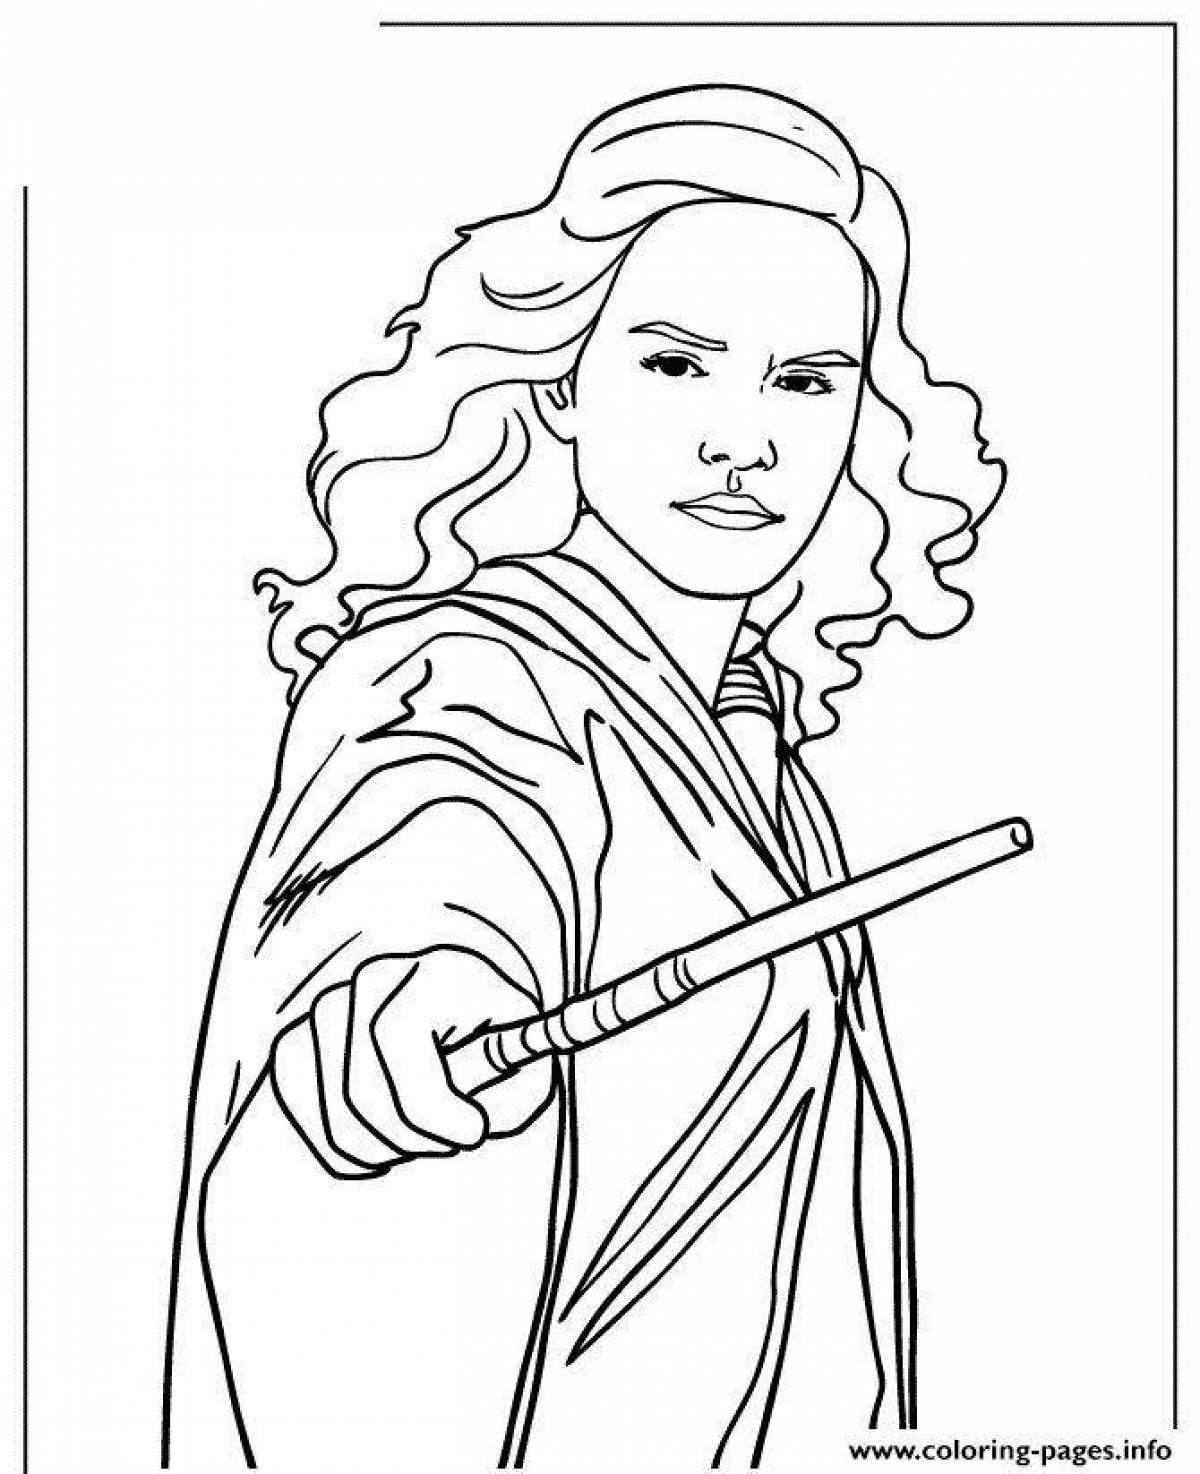 Awesome hermione granger coloring page